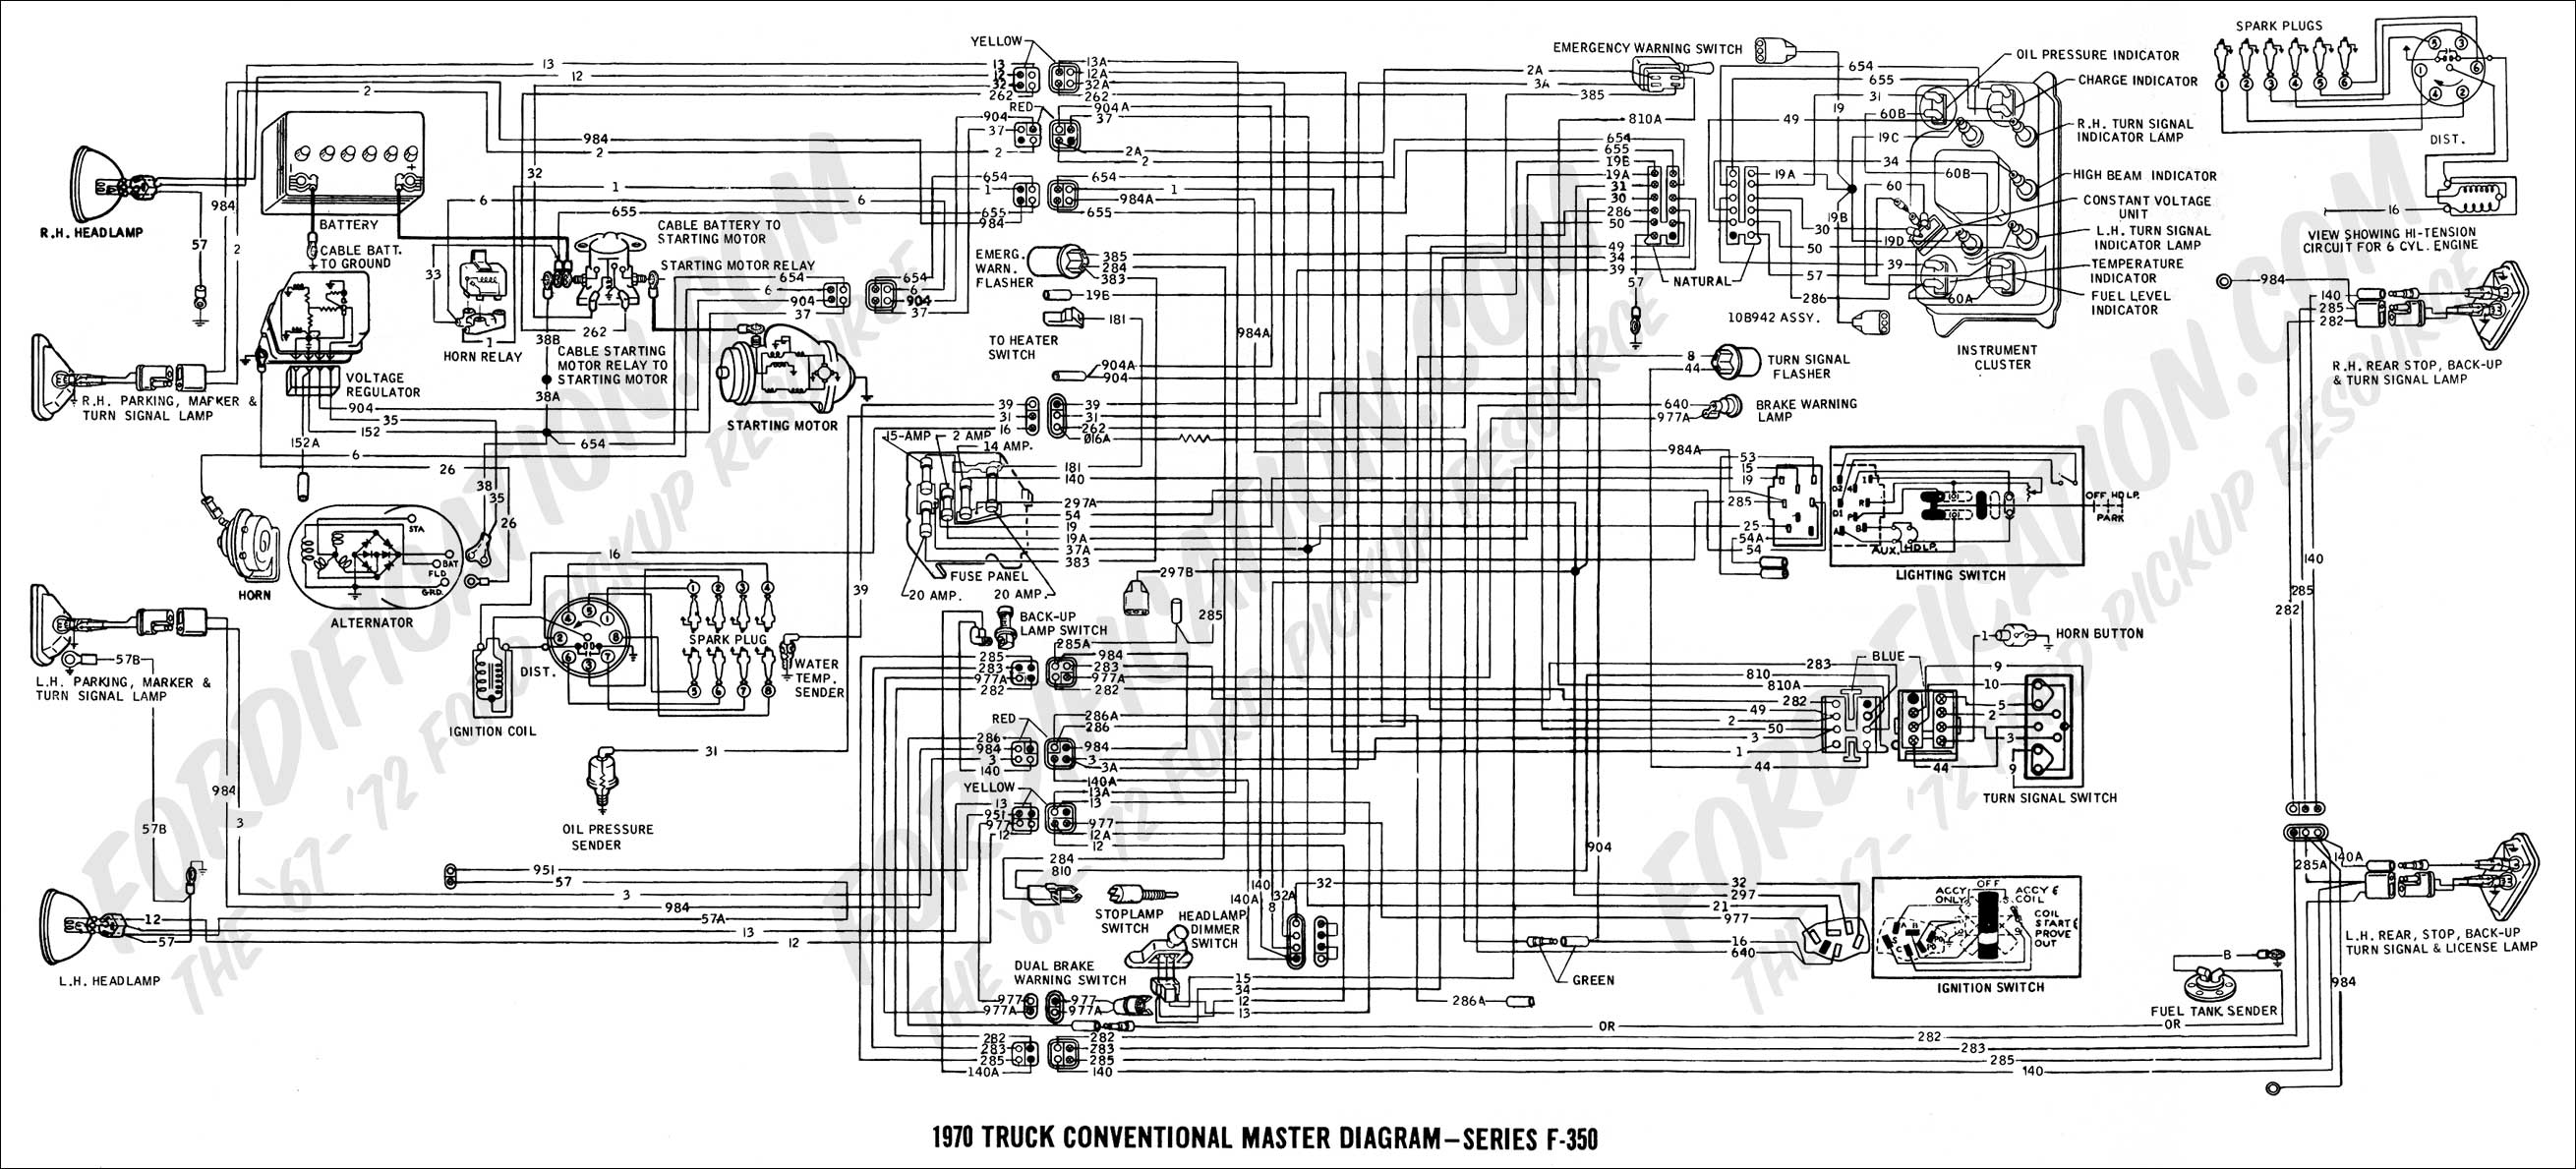 Ford Truck Technical Drawings and Schematics - Section H - Wiring Diagrams  1986 Kenworth W900 Ac Wiring Diagrams    FORDification.com